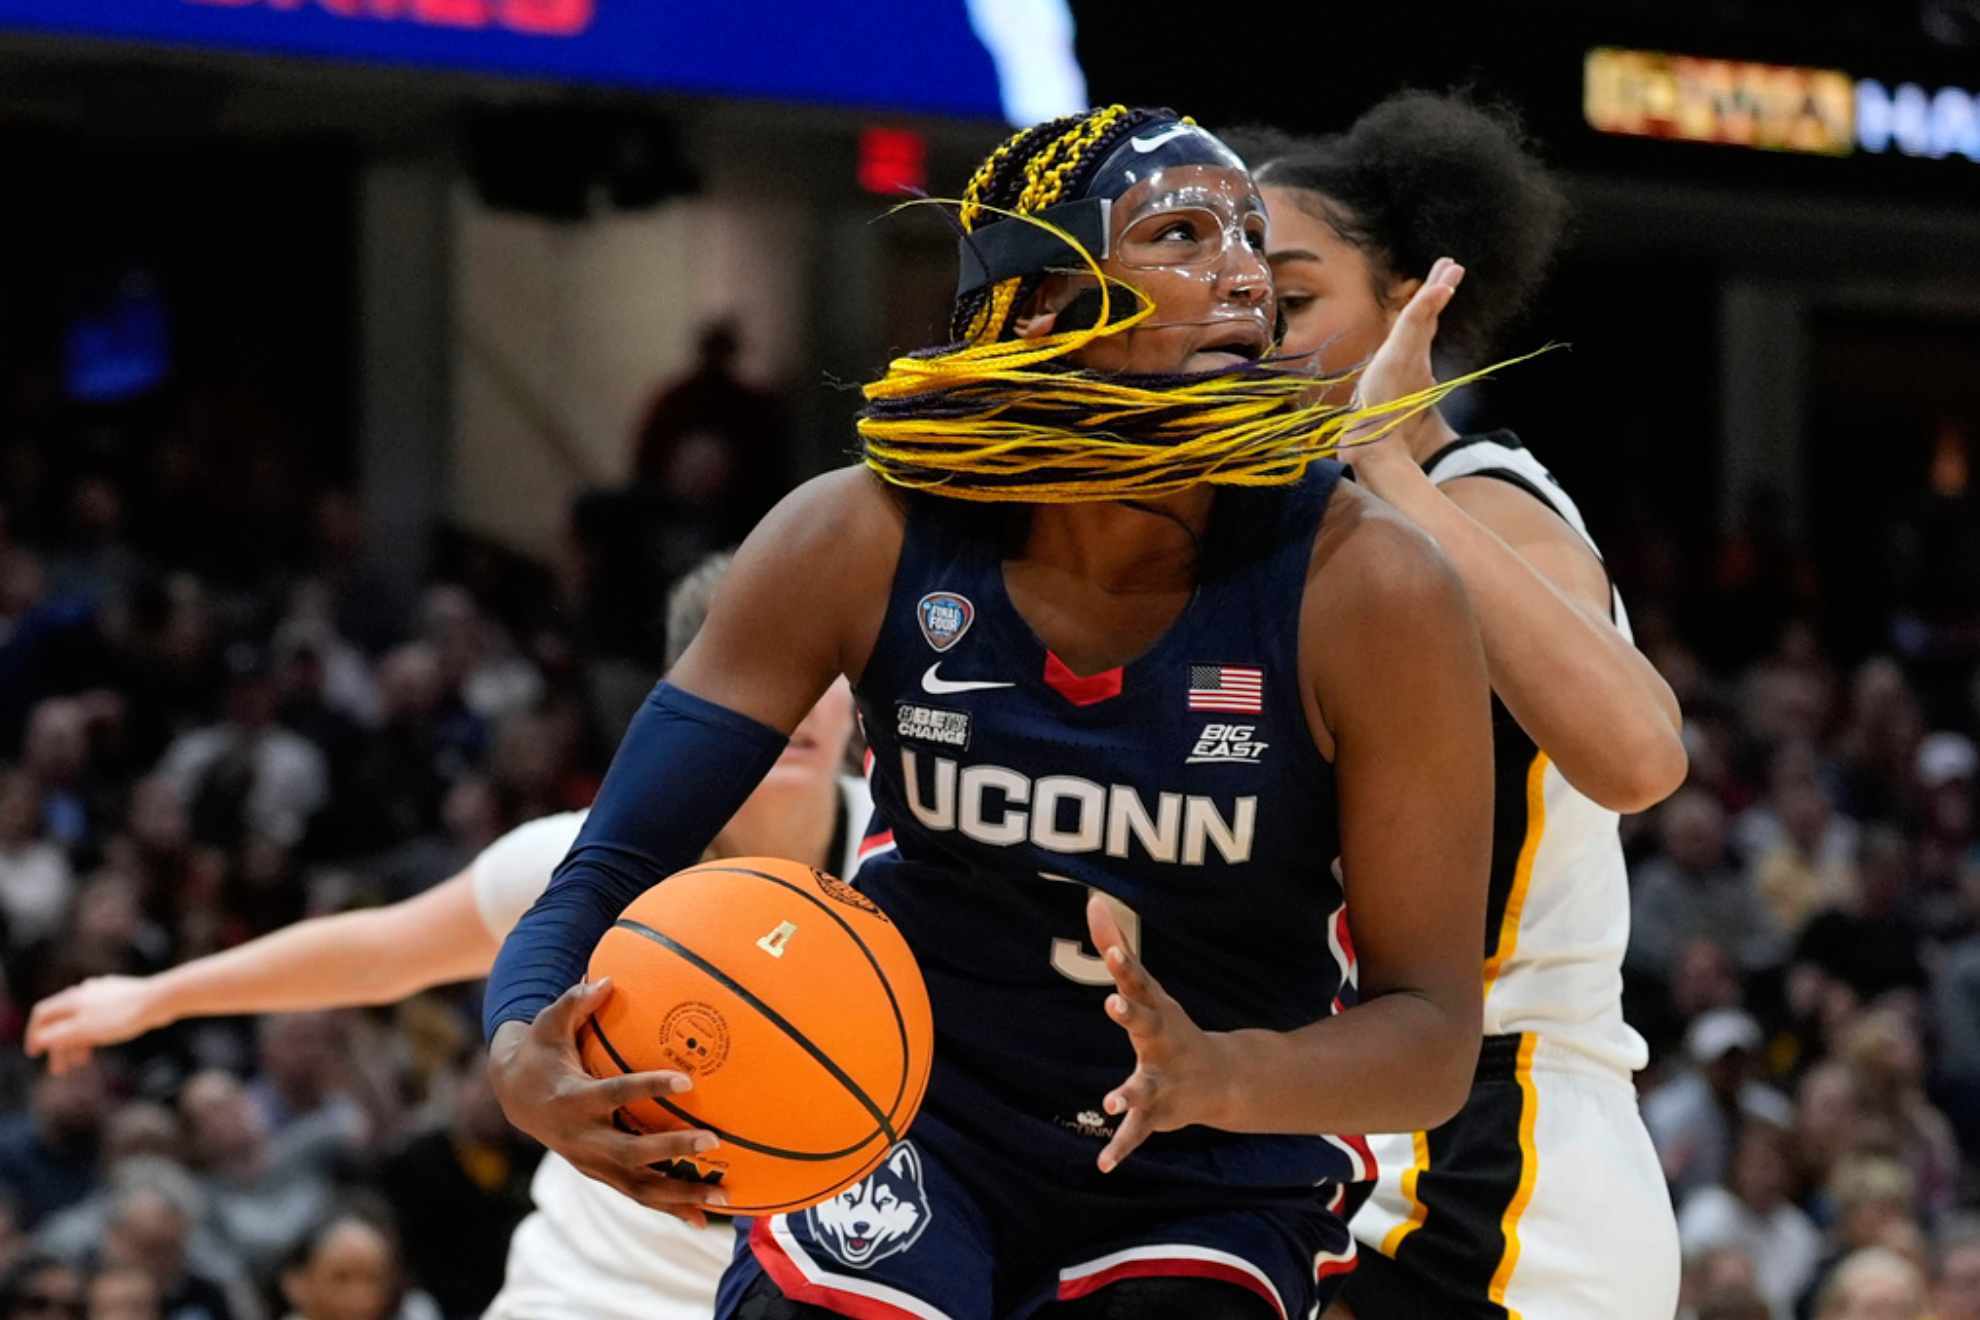 WNBA Draft Requirements: How can a player be eligible for drafting in the WNBA?